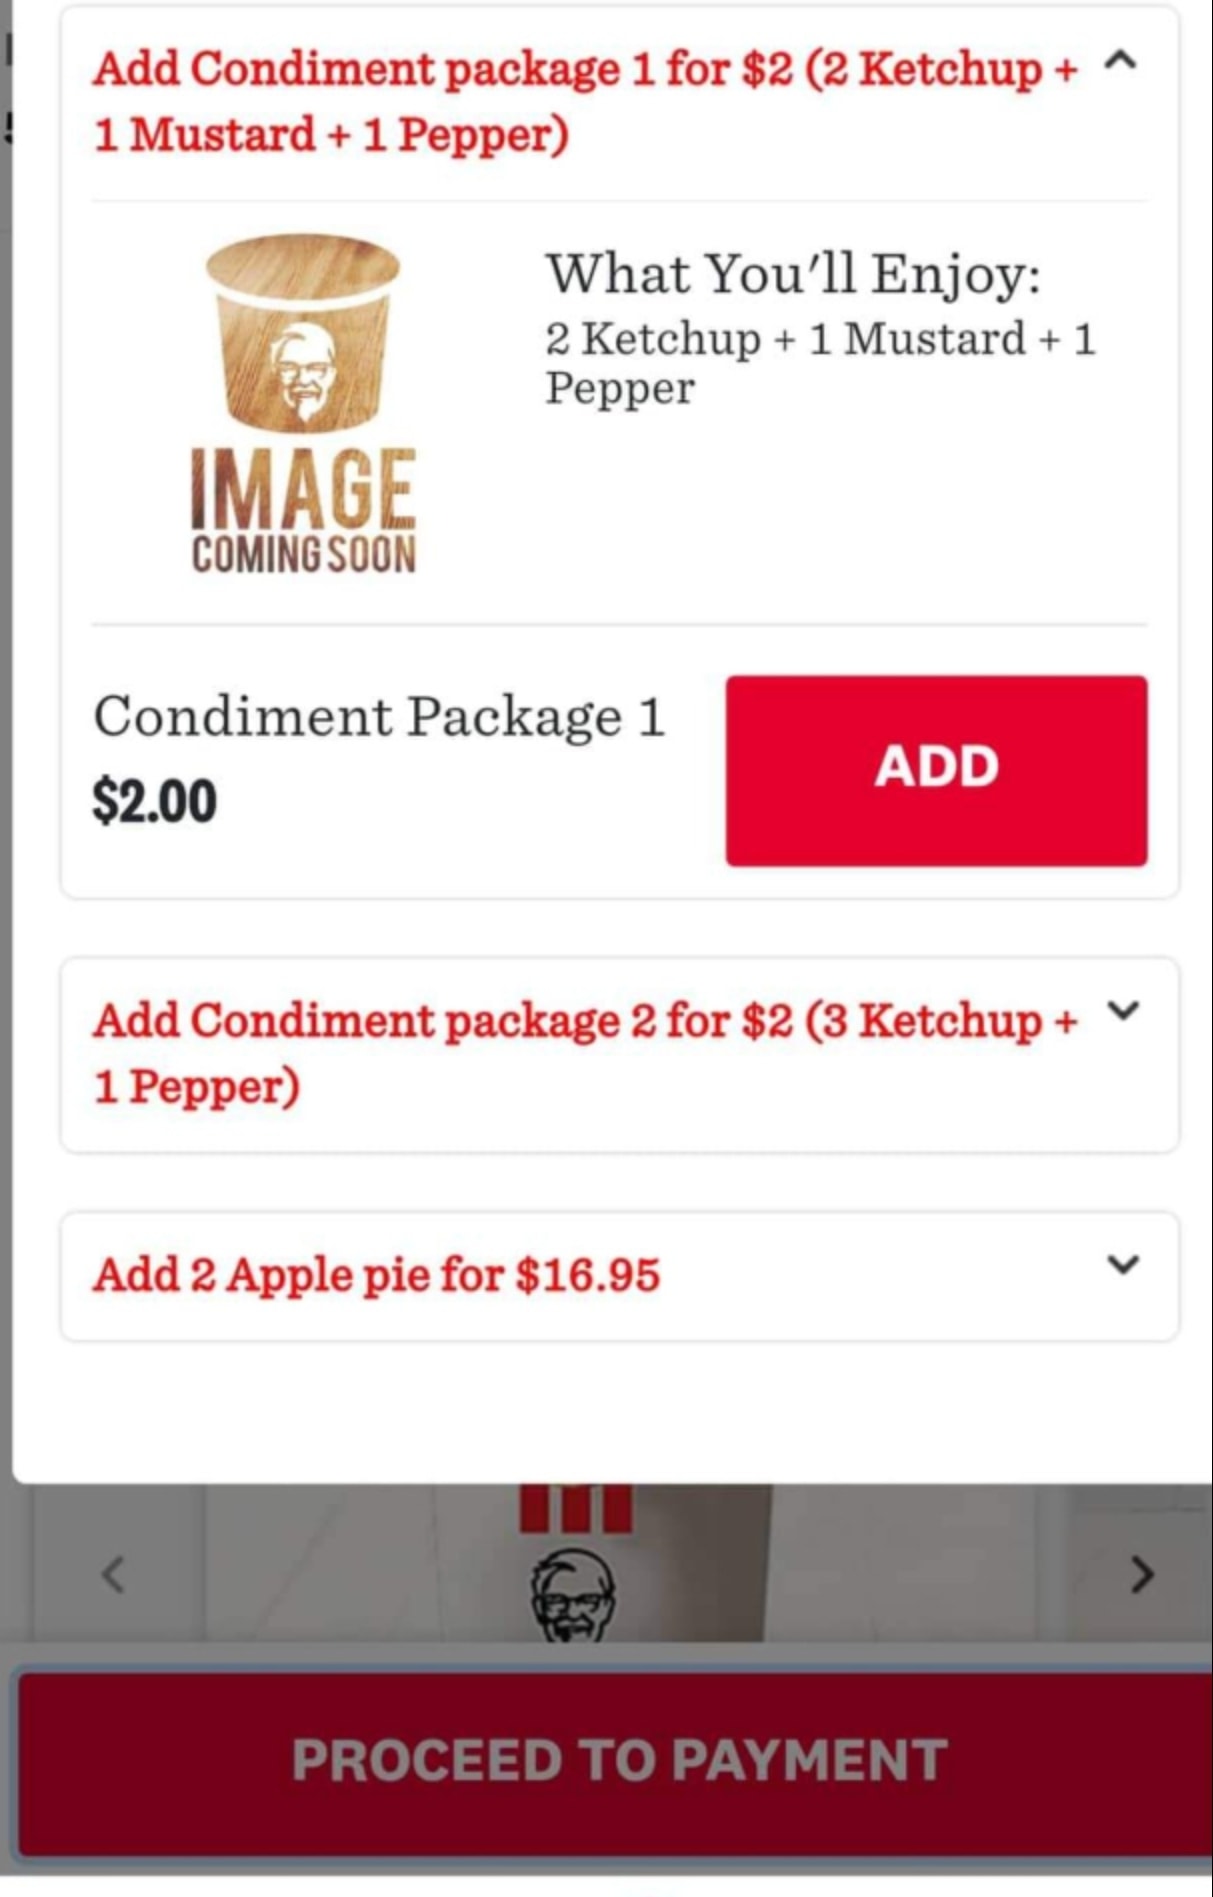 KFC now charging $2 extra for condiments